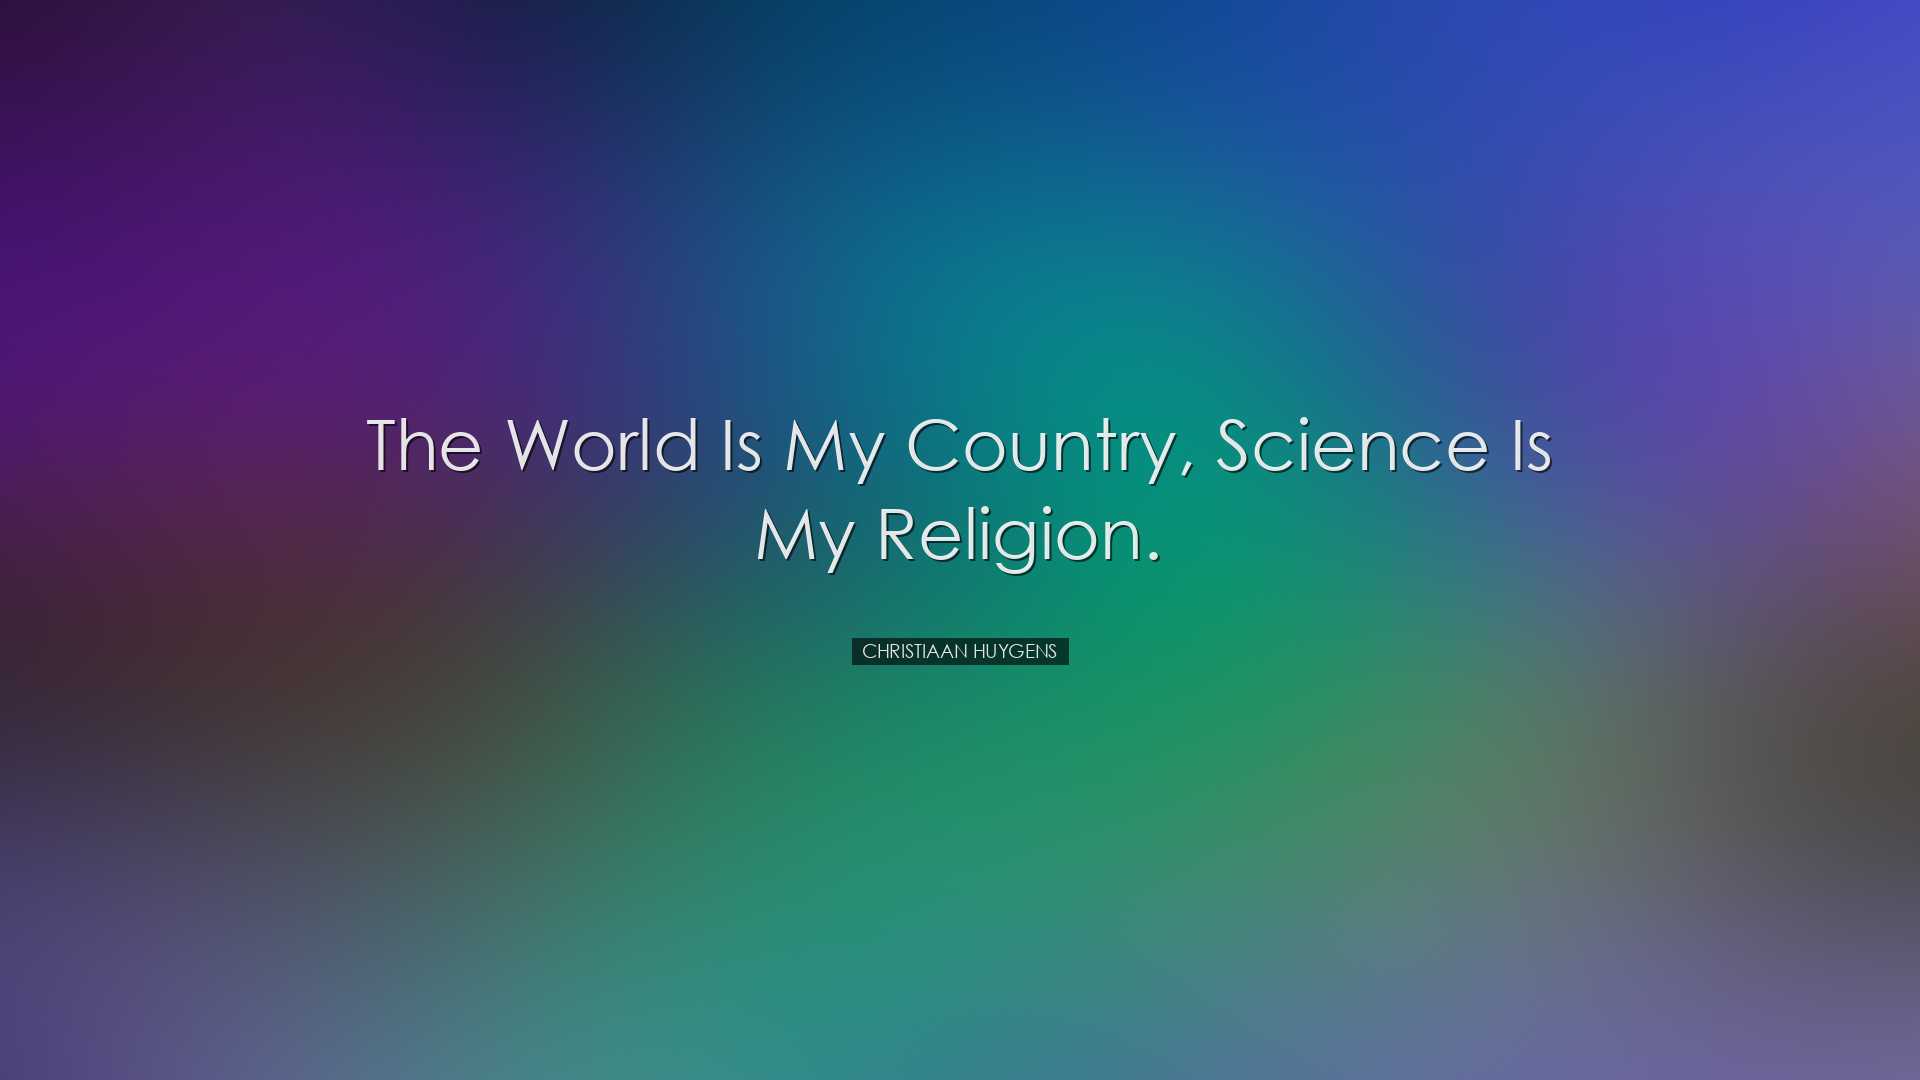 The world is my country, science is my religion. - Christiaan Huyg